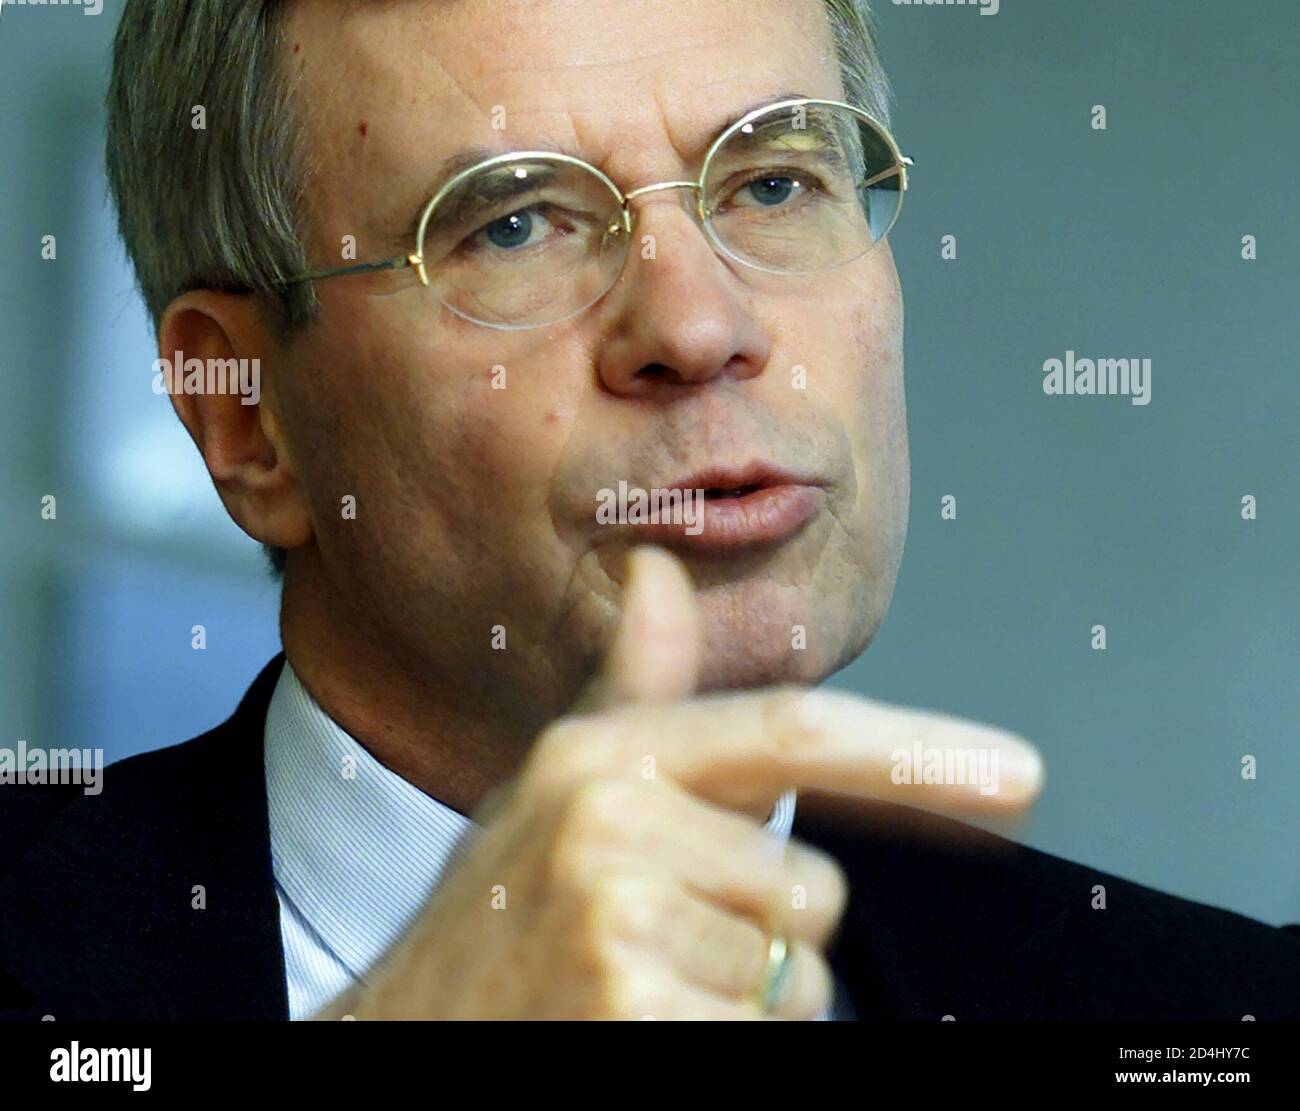 Michael Otto, company chairman of 'Otto Versand', gestures during an interview in Hamburg February 6, 2001. Otto Versand, the world's largest mail-order conglomerat, has seen its Internet sales more than triple in the past year.  CHA/WS Stock Photo